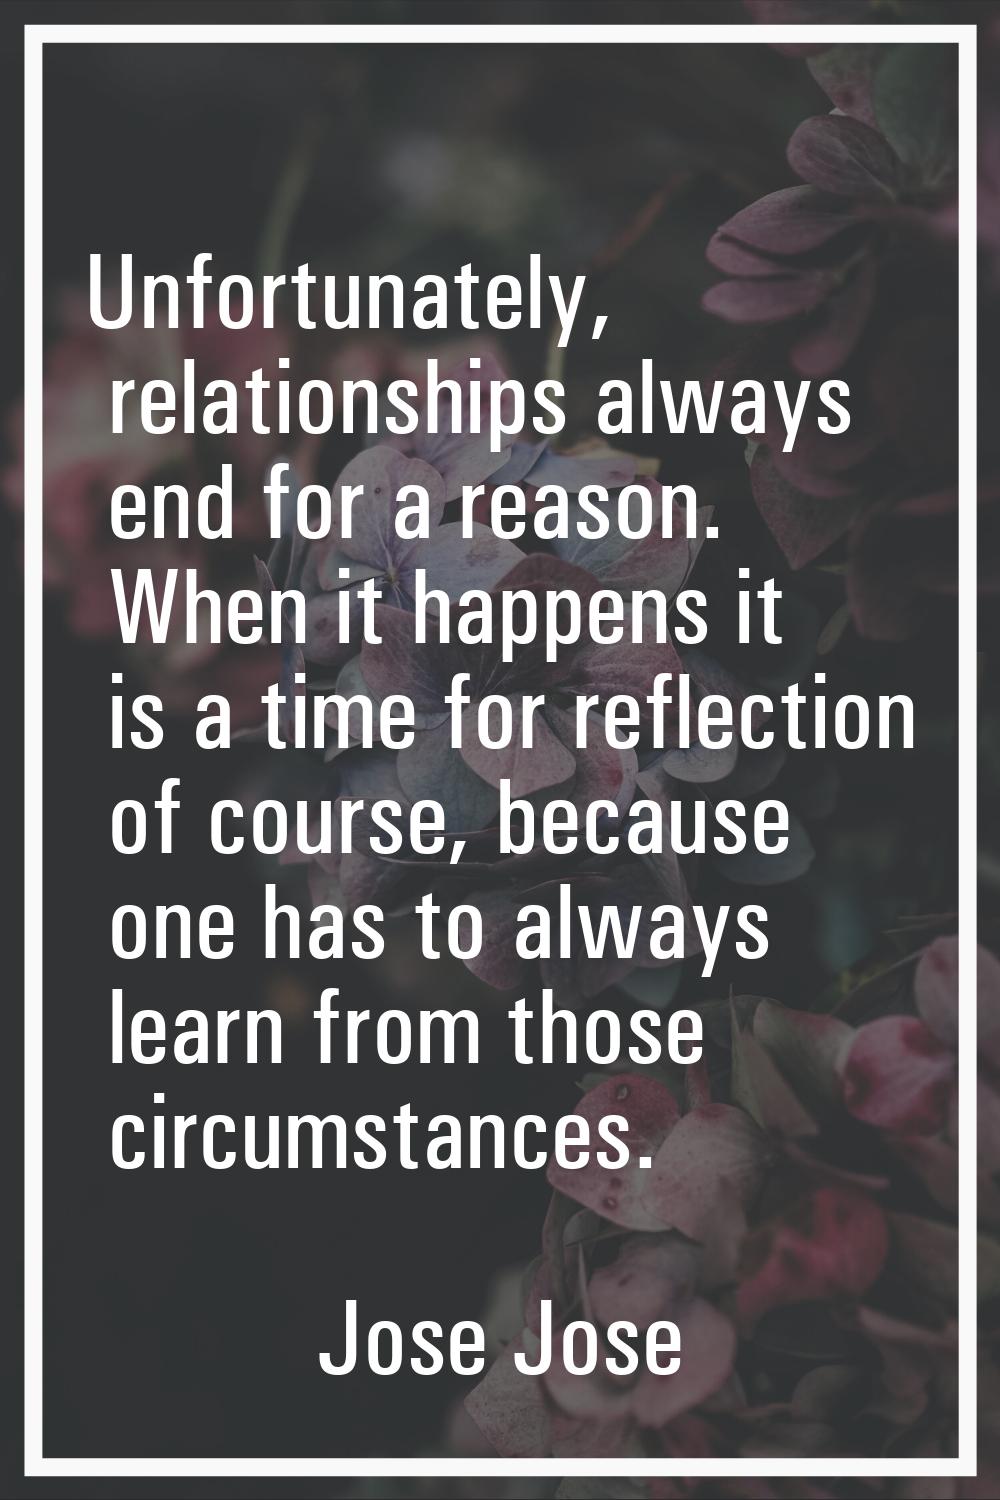 Unfortunately, relationships always end for a reason. When it happens it is a time for reflection o